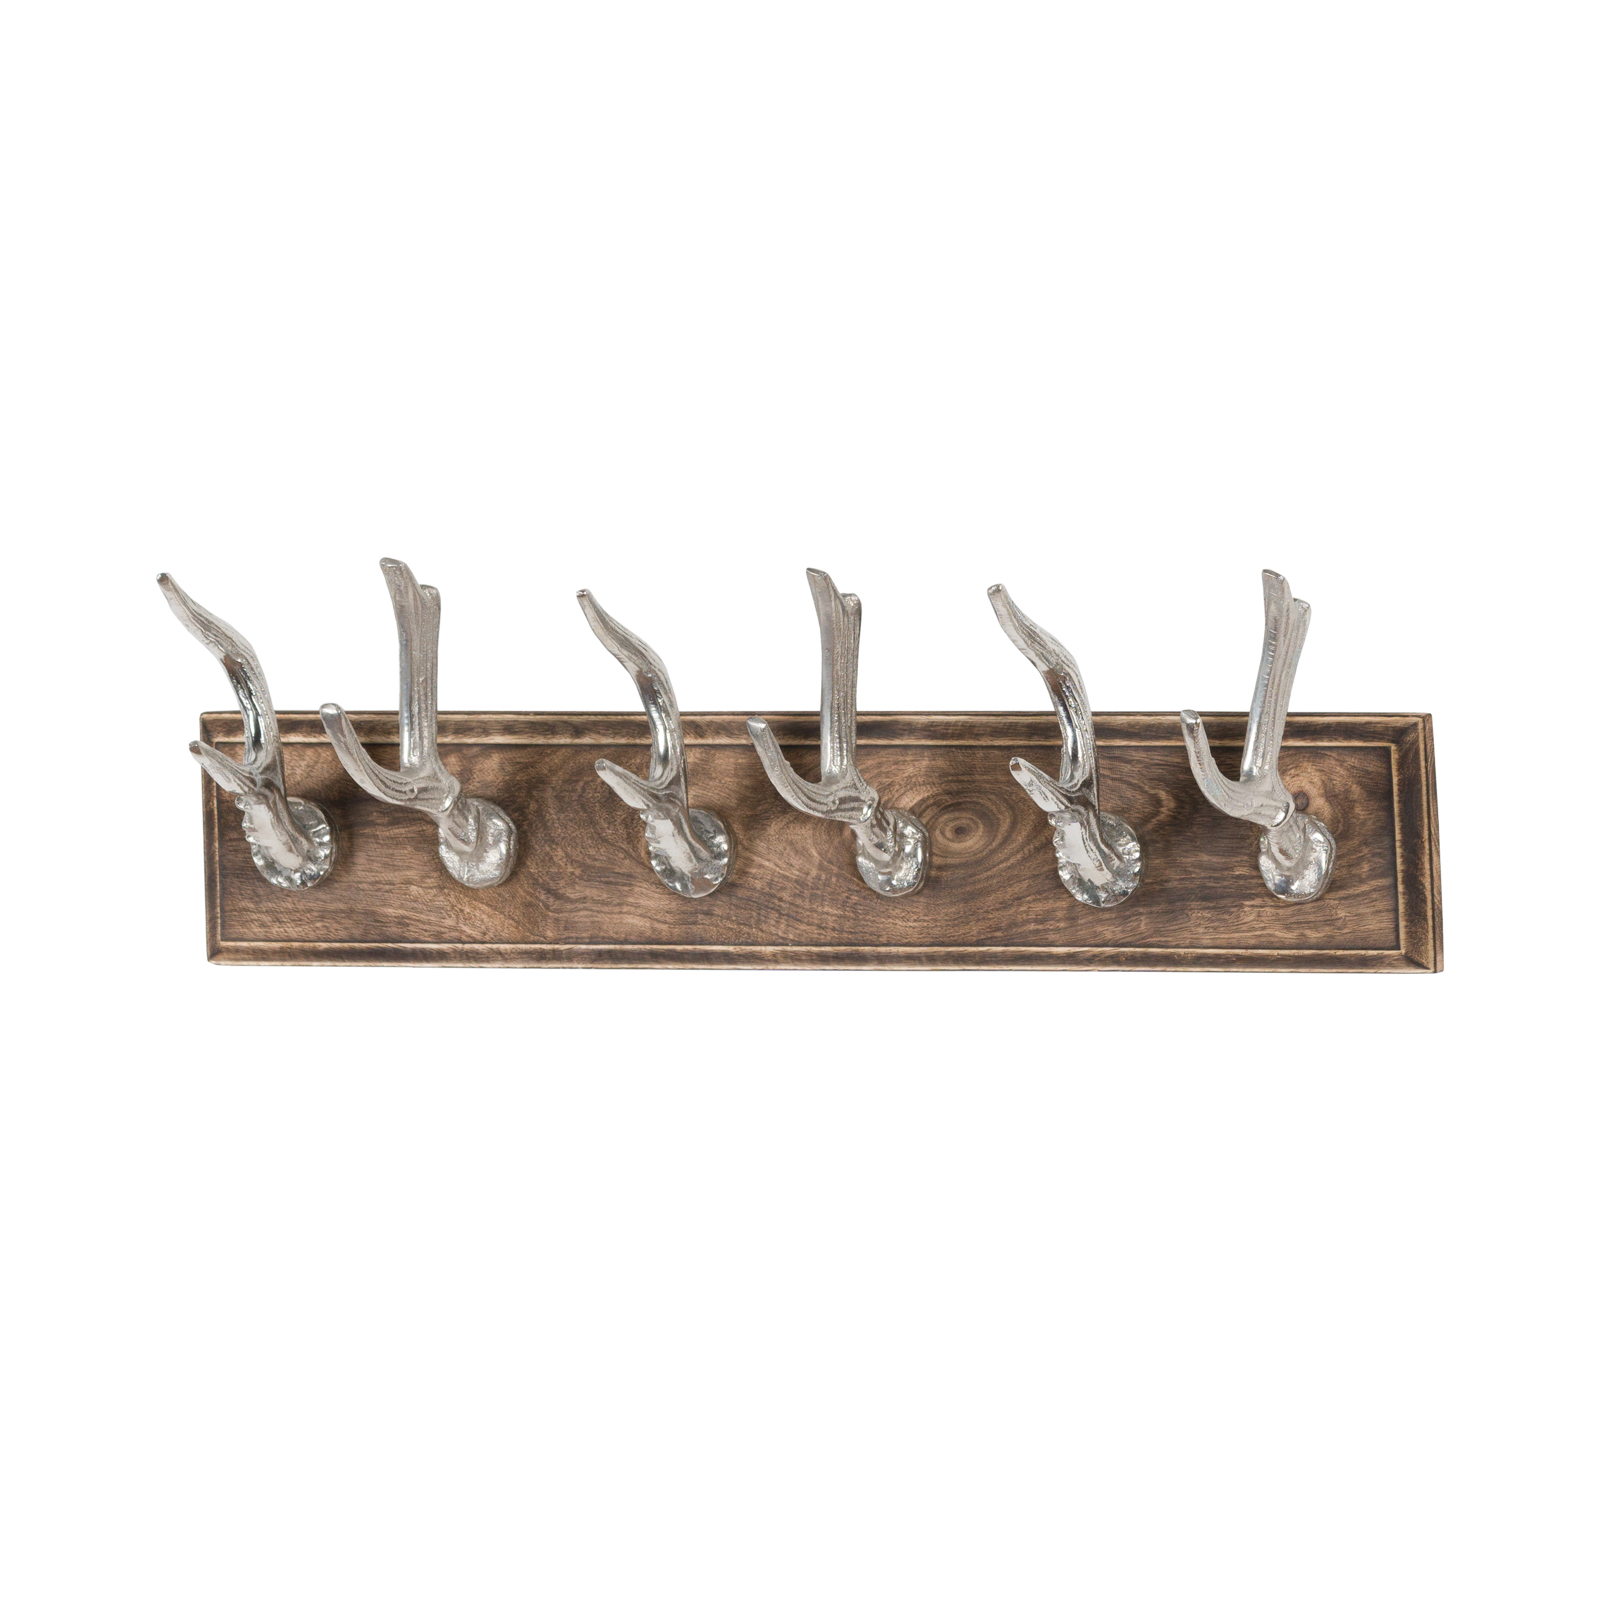 Polished Nickel Stag Hooks On A Wooden Board